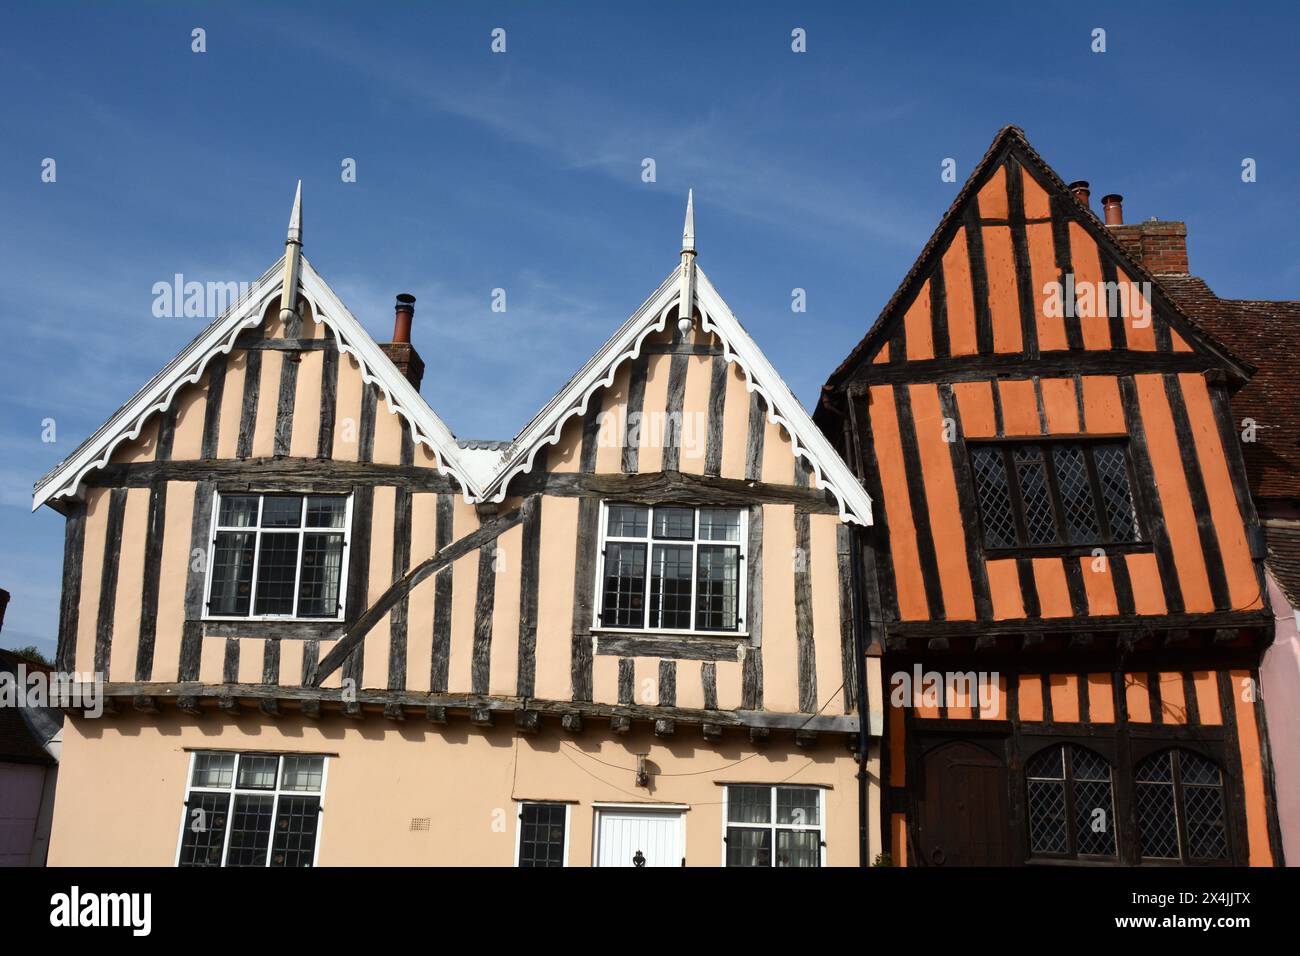 The famous old medieval half-timbered 'crooked house' in the village of Lavenham in Suffolk county, England, United Kingdom. Stock Photo